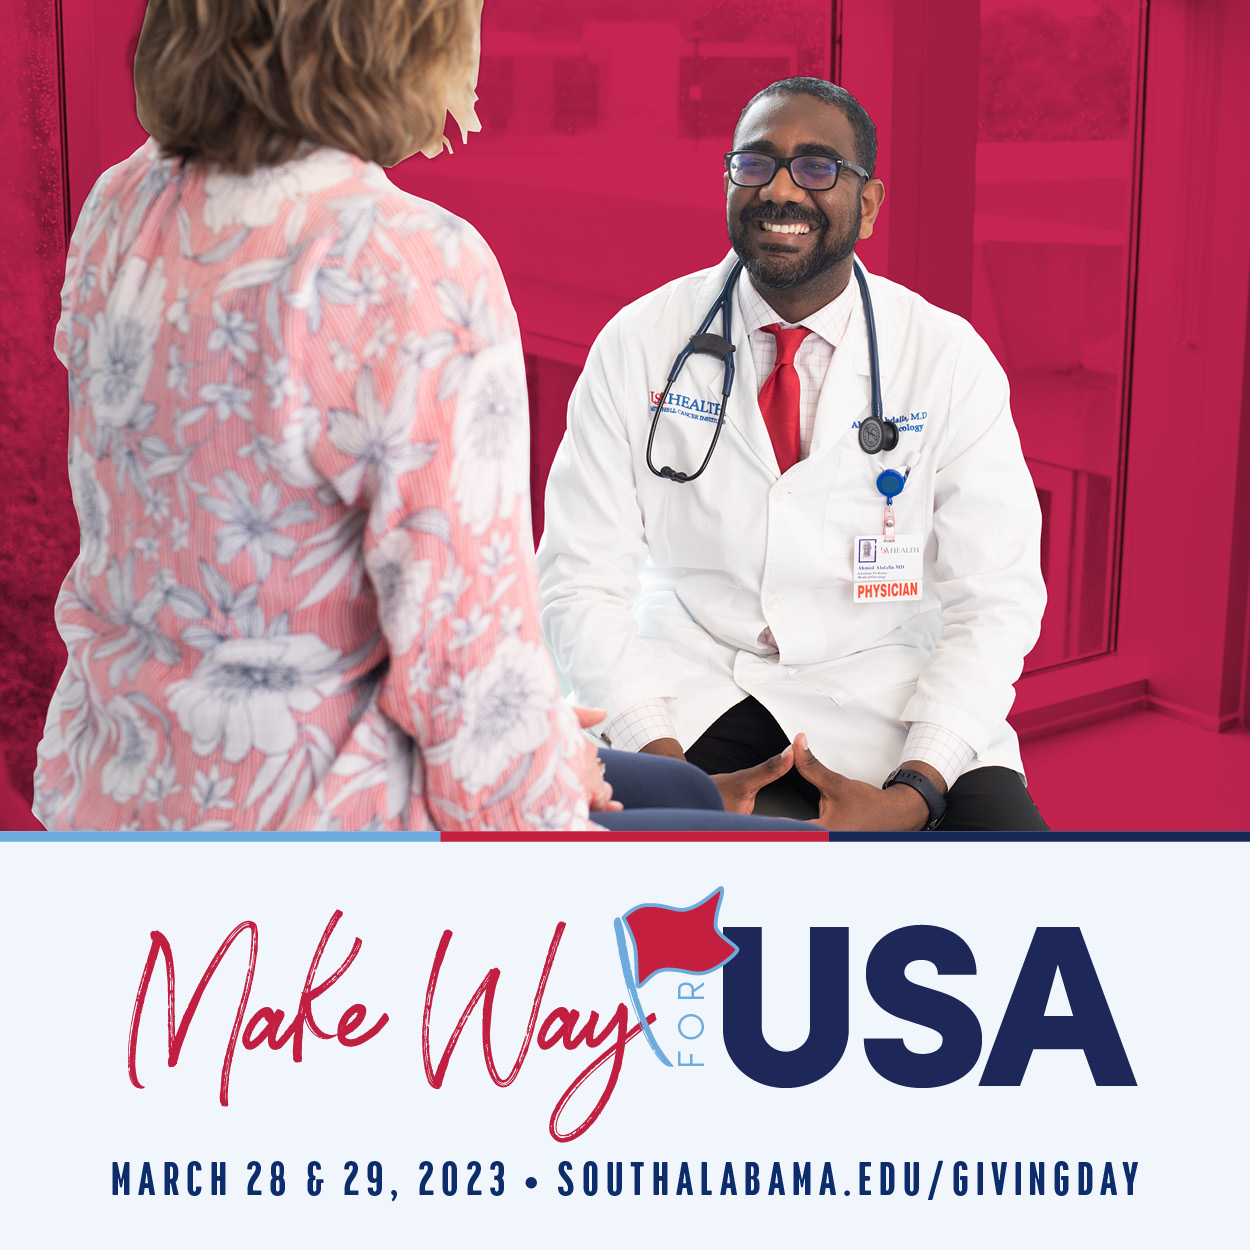 Make Way for USA March 28 and 29, 2023 Southalabama.edu/givingday with image of USA Health physician talking to patient.